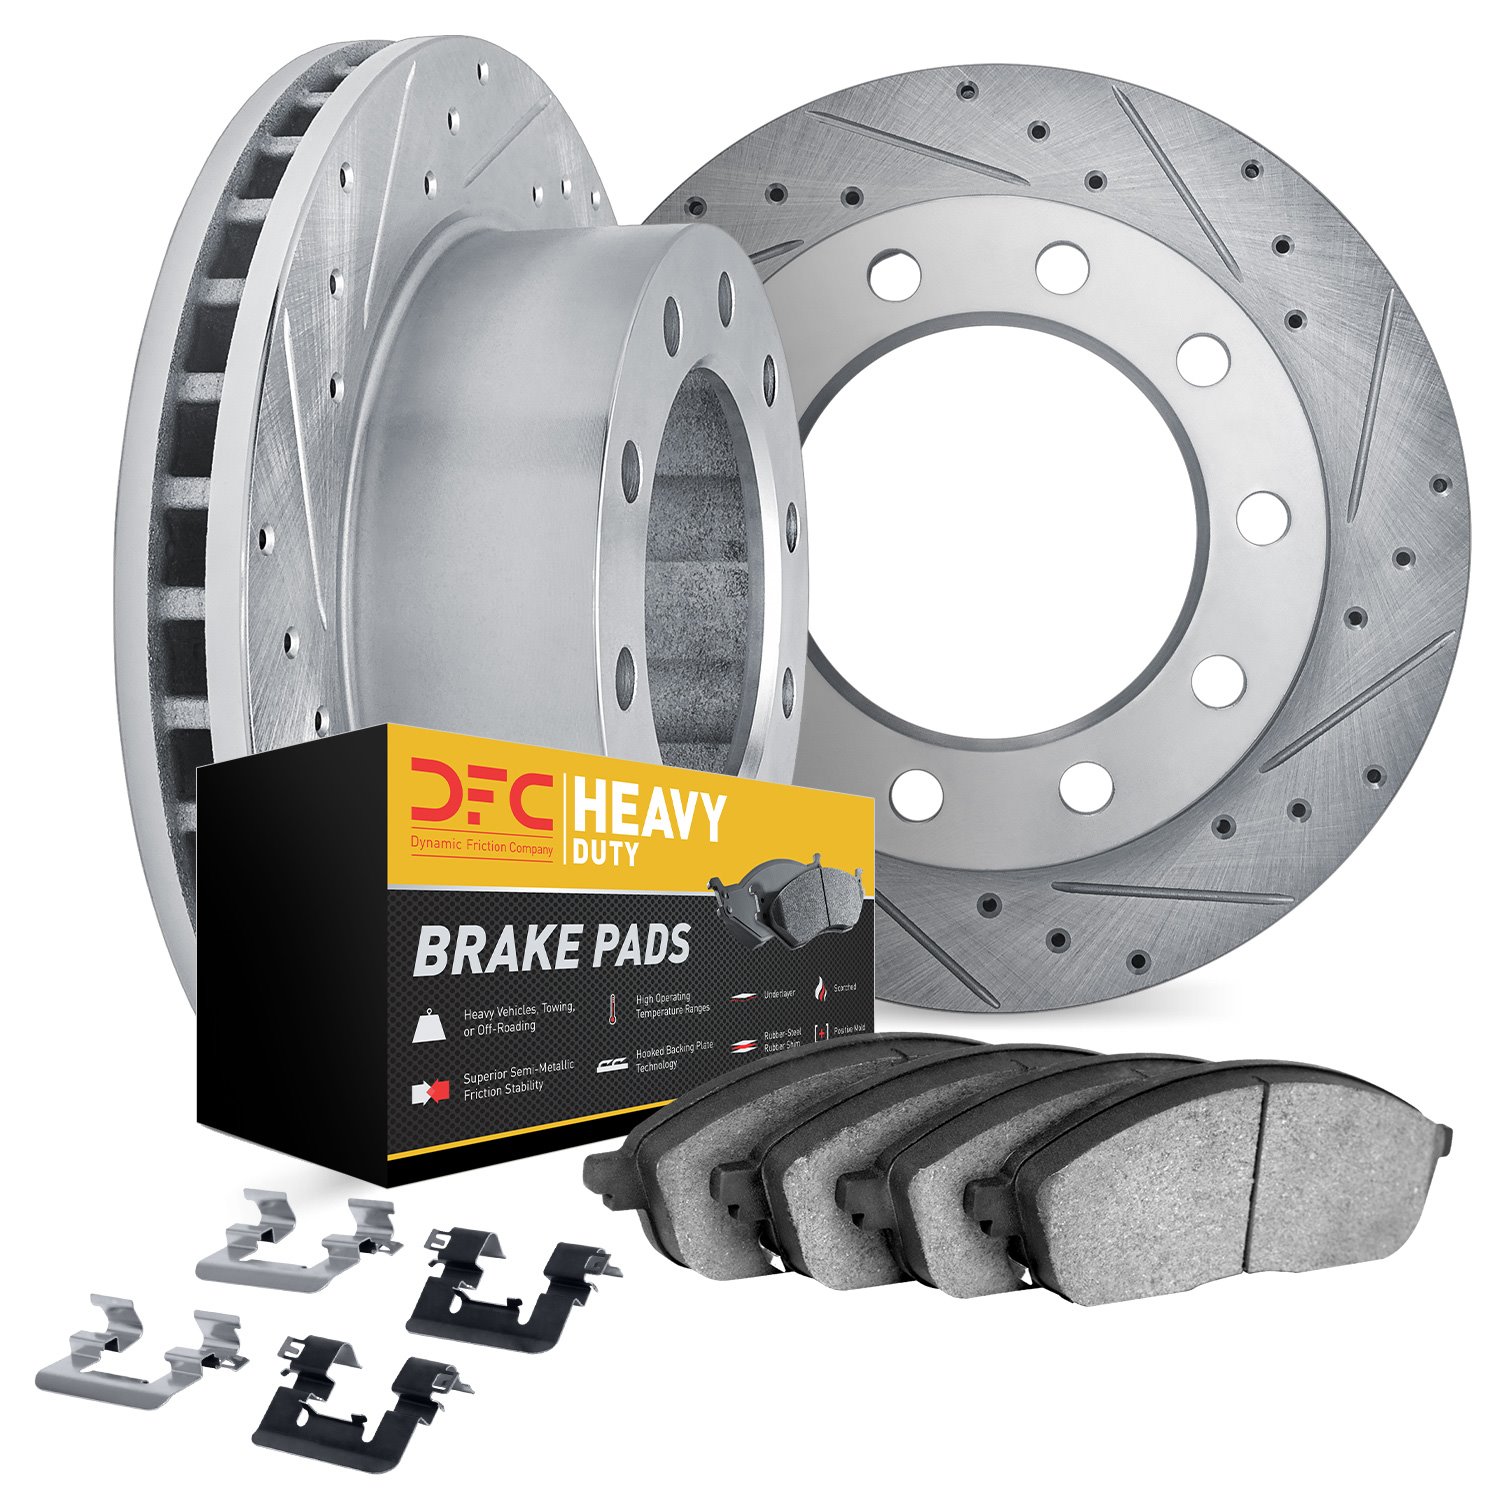 7212-99264 Drilled/Slotted Rotors w/Heavy-Duty Brake Pads Kit & Hardware [Silver], Fits Select Ford/Lincoln/Mercury/Mazda, Posit